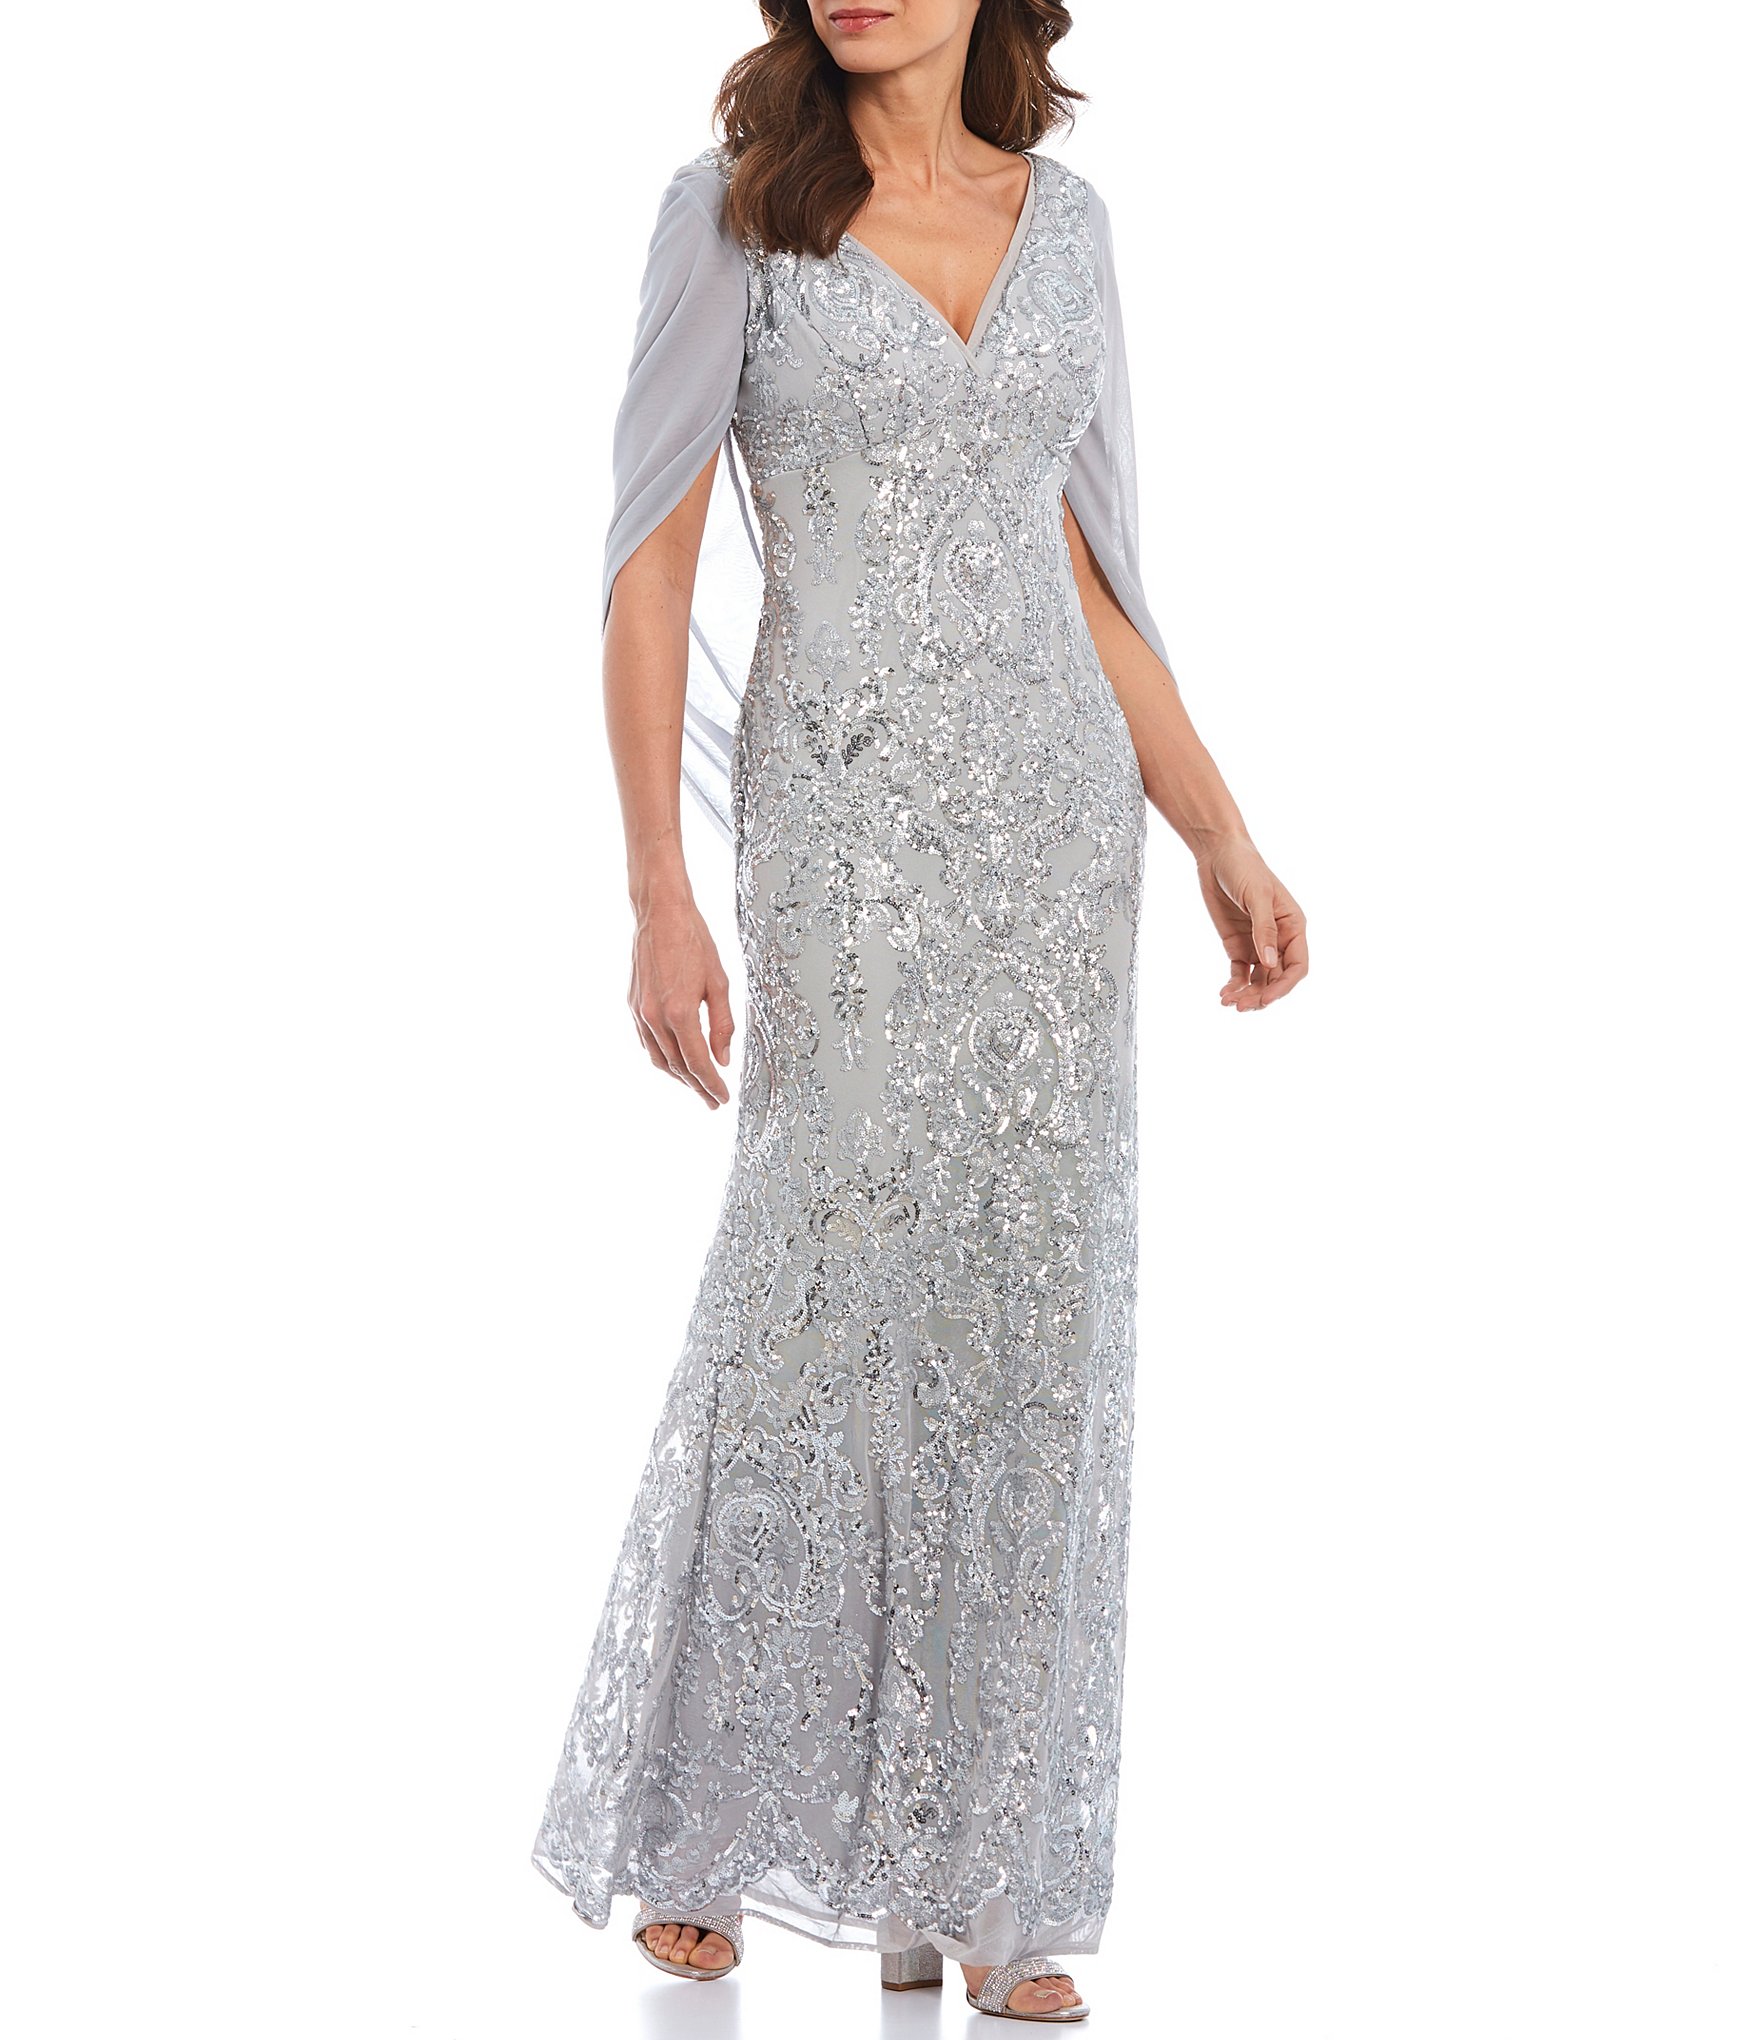 mother of the bride dresses in silver grey